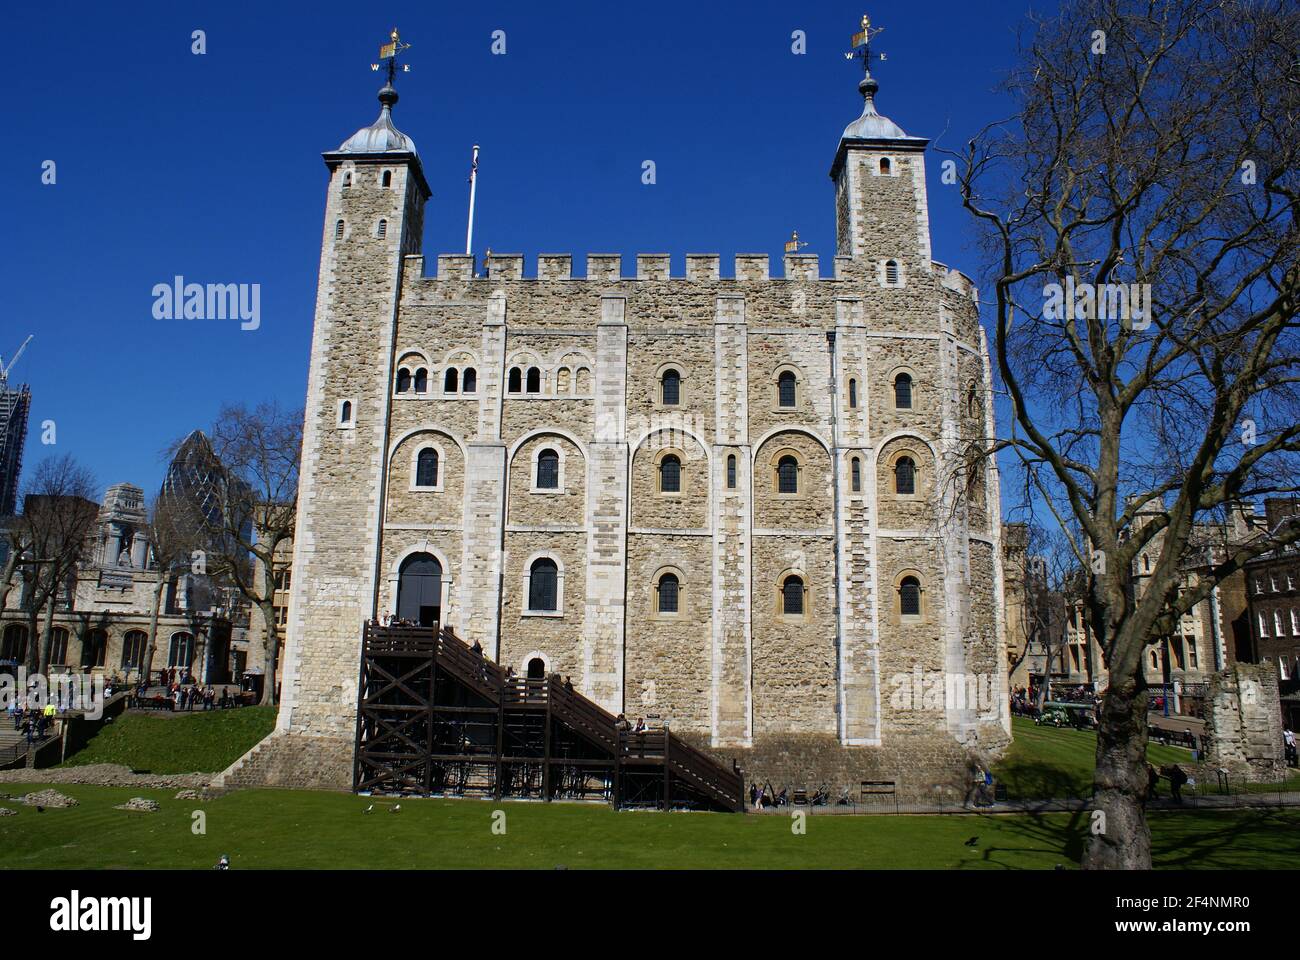 The White Tower, Home of the Royal Armouries at the Tower of London (UK) Stock Photo